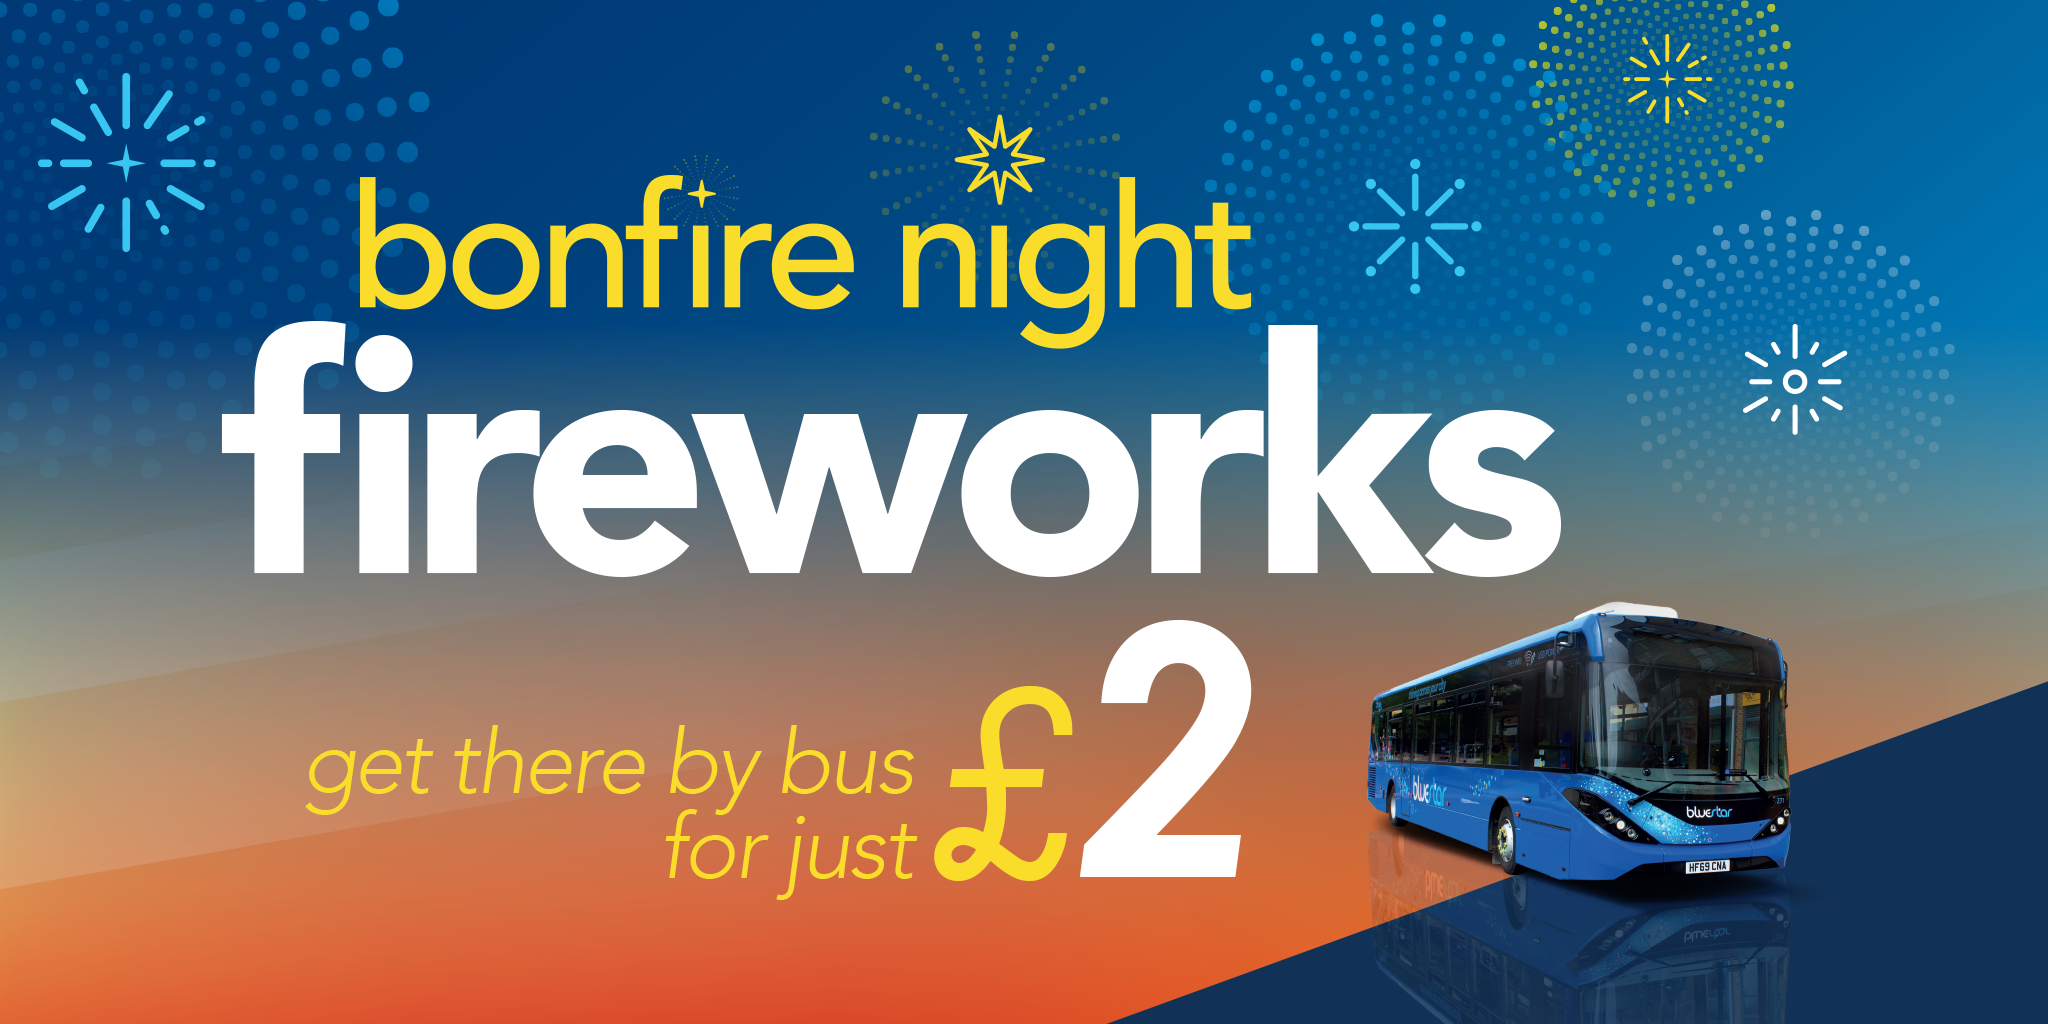 get to bonfire night fireworks displays by bus for just £2